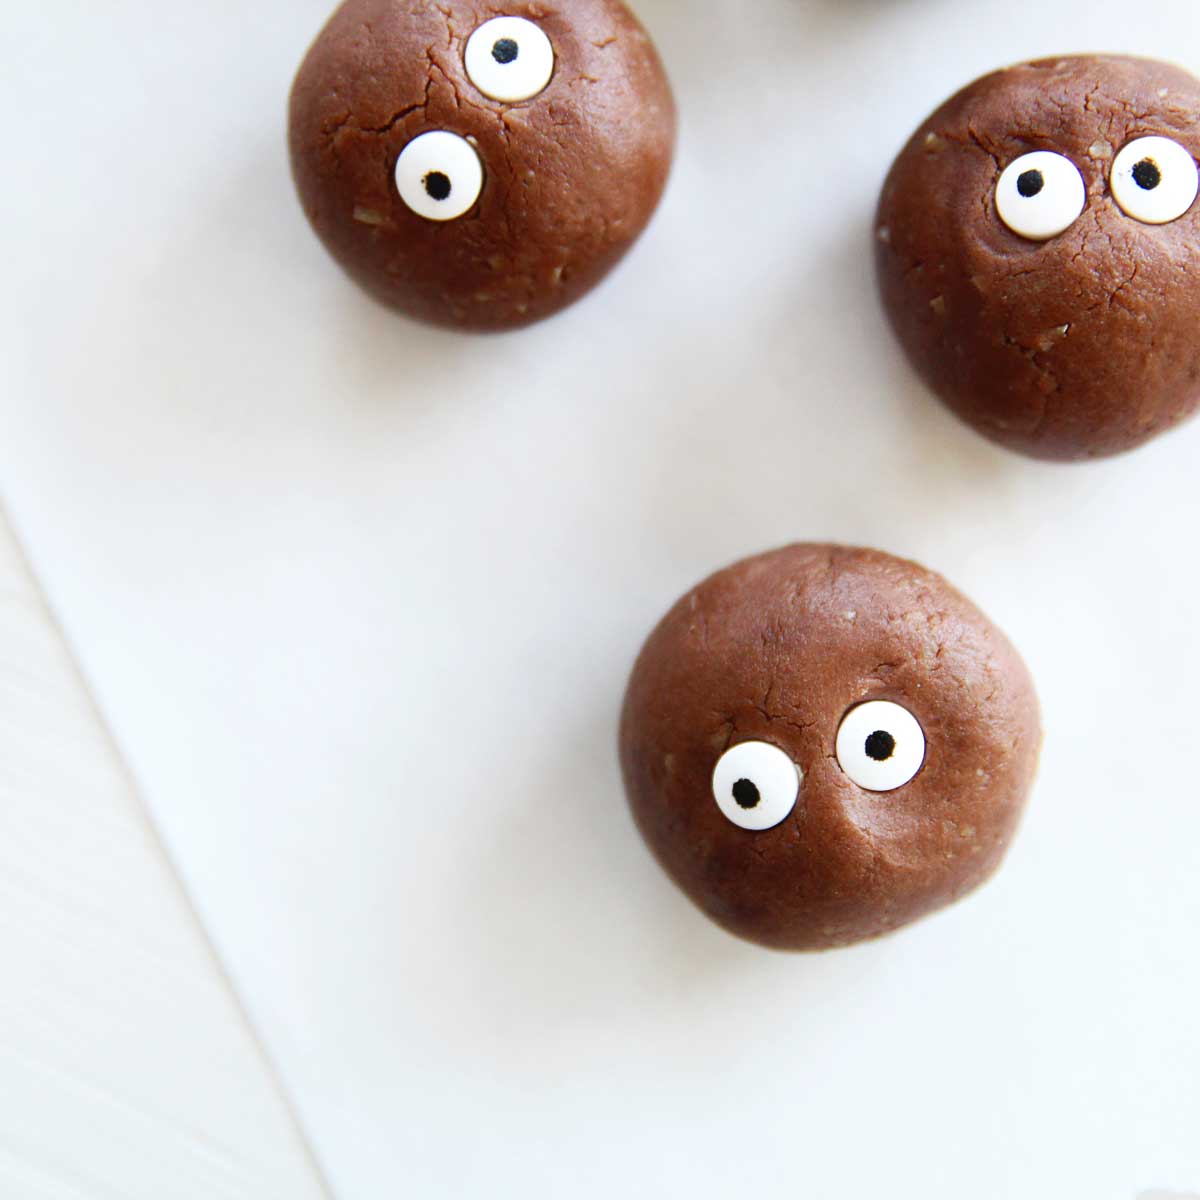 Soot Spirit Chocolate Protein Balls for Halloween (no-bake, Vegan recipe) - Chocolate Protein Balls